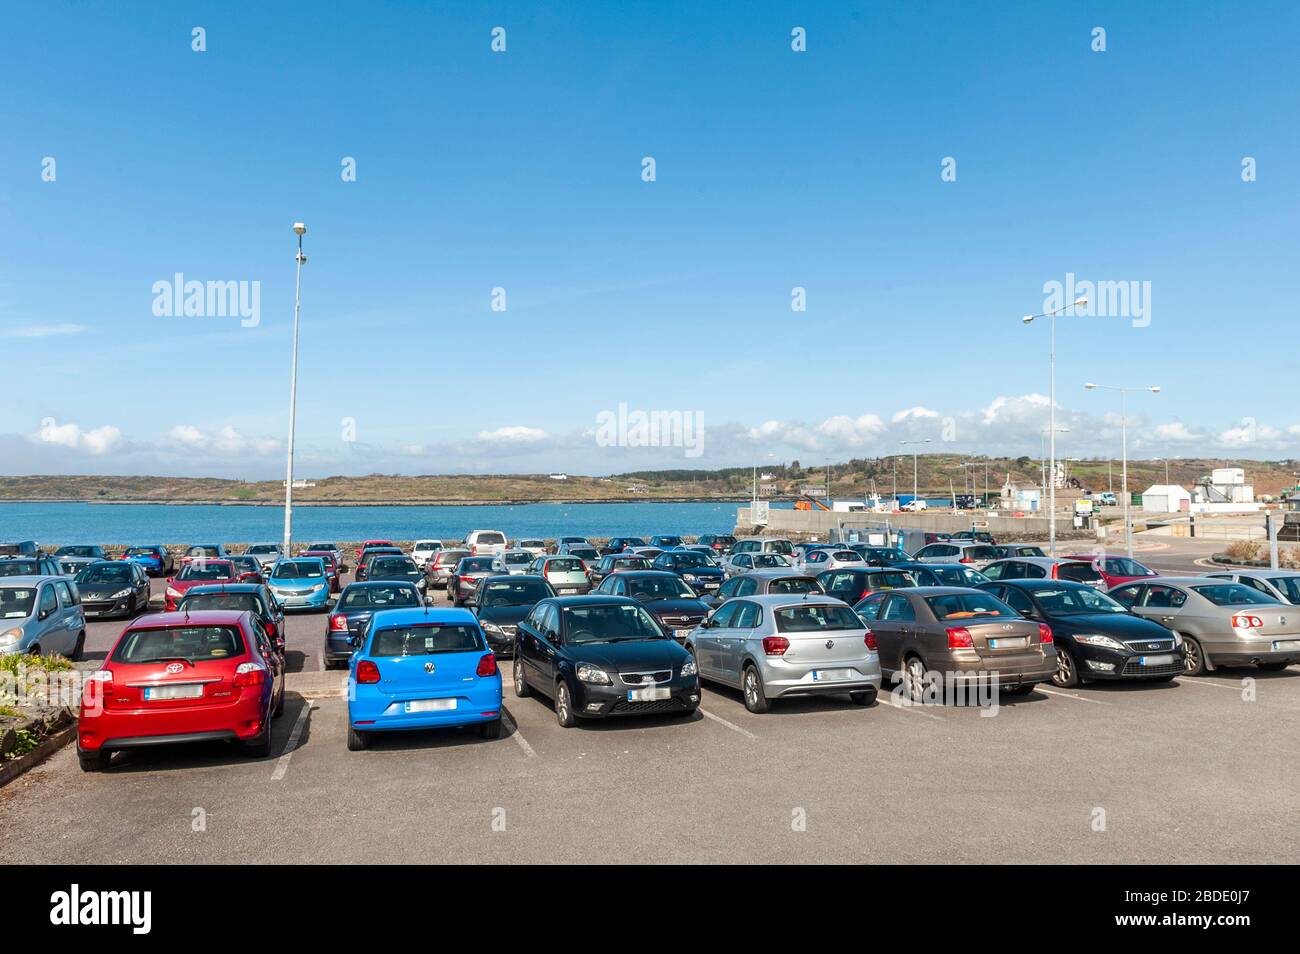 Baltimore, West Cork, Ireland. 8th Apr, 2020. Despite the government imploring people to stay at home for the Easter weekend, a Baltimore car park was almost full today. There were many Dublin registered cars and also some vehicles with UK reg plates. Credit: Andy Gibson/Alamy Live News Stock Photo